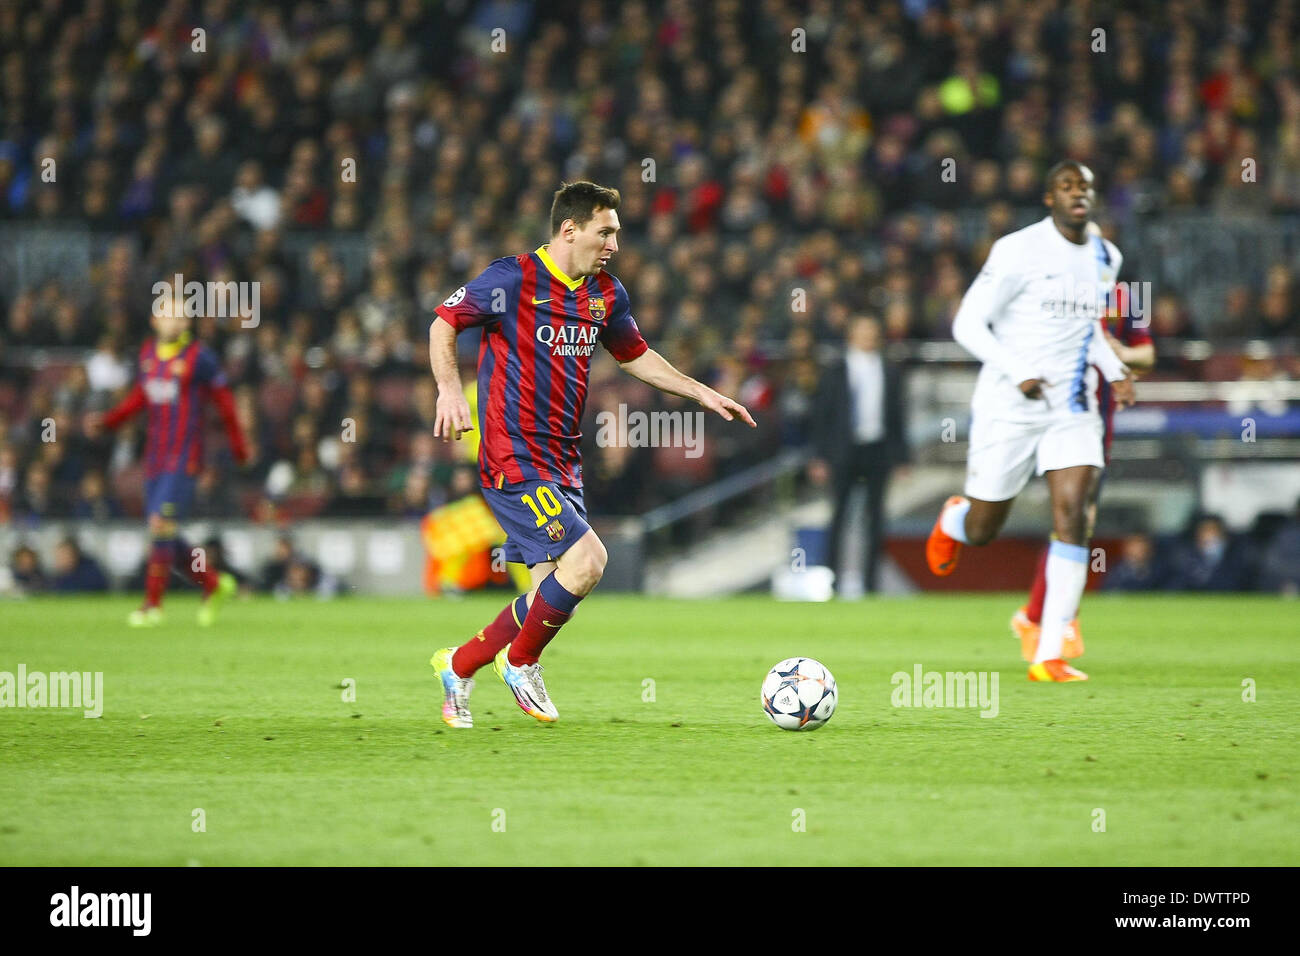 Barcellona, Spain. 12th Mar, 2014. Leo Messi in the match between FC Barcelona and Manchester City, for the second leg of the round of 16 of the Champions League match at the Camp Nou on March 12, 2014. Photo: Ricard Rovira/Urbanandsport/Nurphoto. Credit:  Ricard Rovira/NurPhoto/ZUMAPRESS.com/Alamy Live News Stock Photo